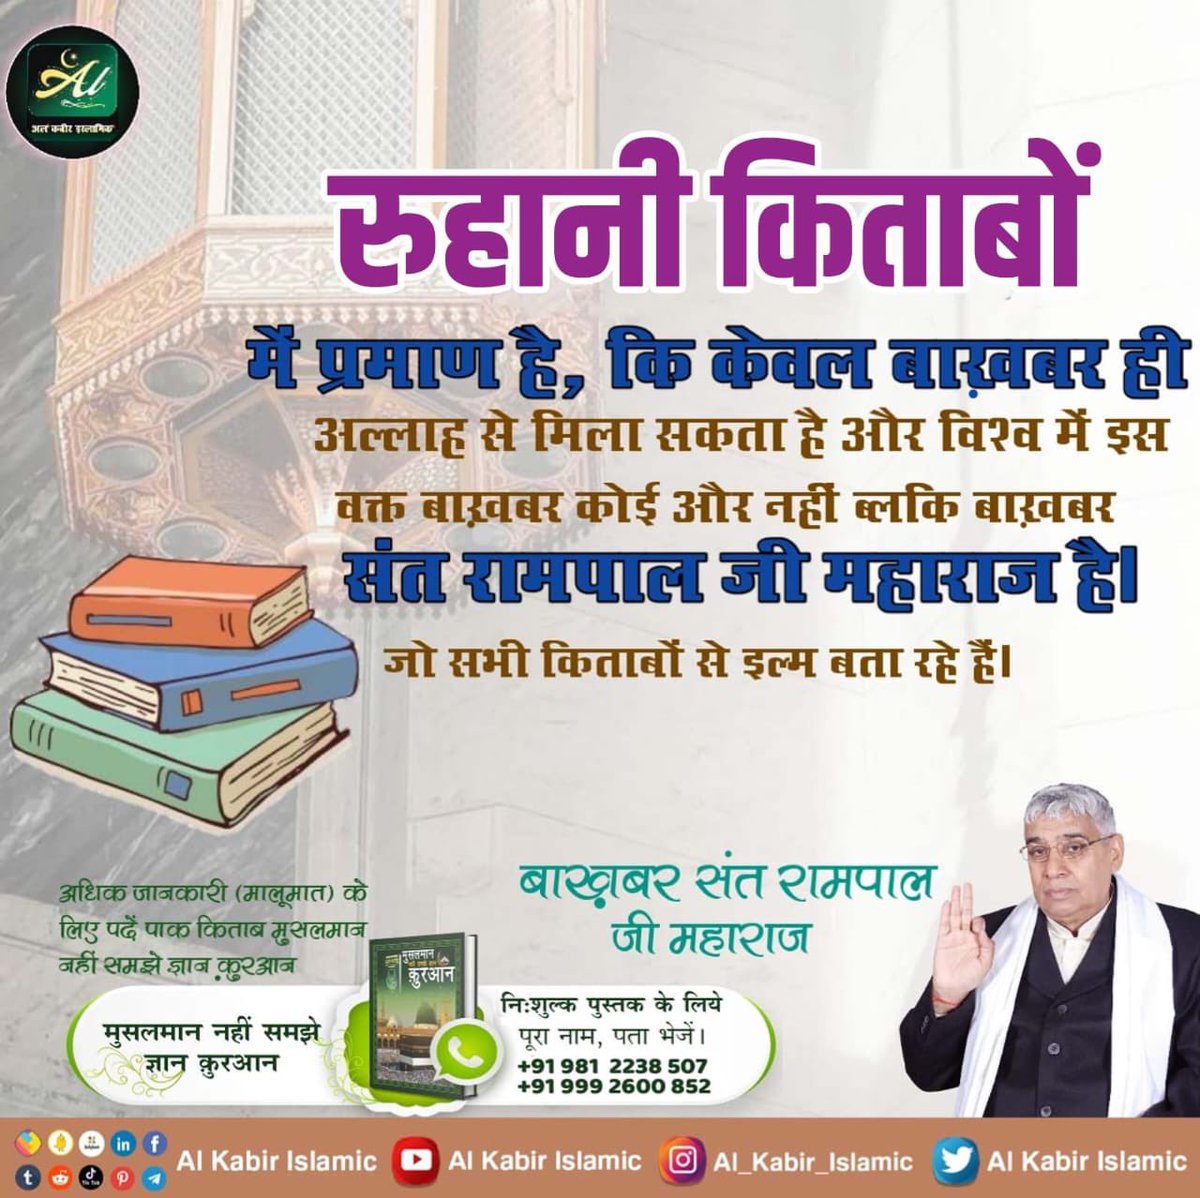 #अल्लाह_का_इल्म_बाखबर_से_पूछो Baakhabar @SaintRampalJiM has revealed the true spiritual knowledge from our holy scriptures & proved that Supreme Lord is Kabir Saheb Ji. We can only attain ultimate peace & salvation by worshipping supreme lord as guided by @SaintRampalJiM🙏🏻